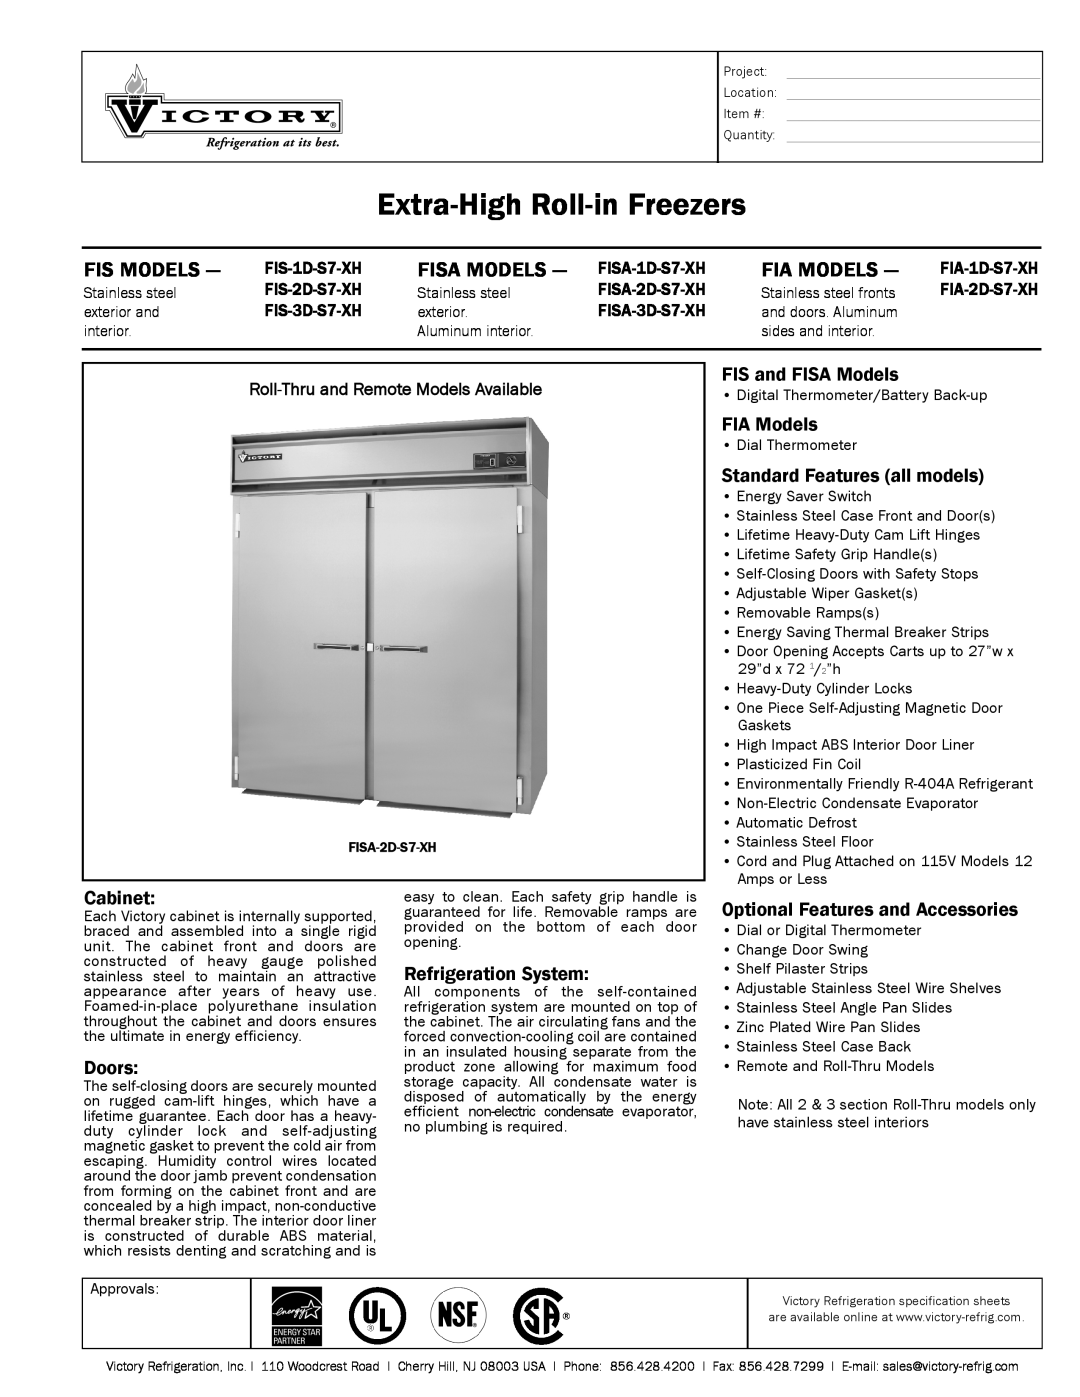 Victory Refrigeration FIS-2D-S7-XH specifications Extra-High Roll-inFreezers, Fis Models, Fisa Models, Fia Models, Cabinet 